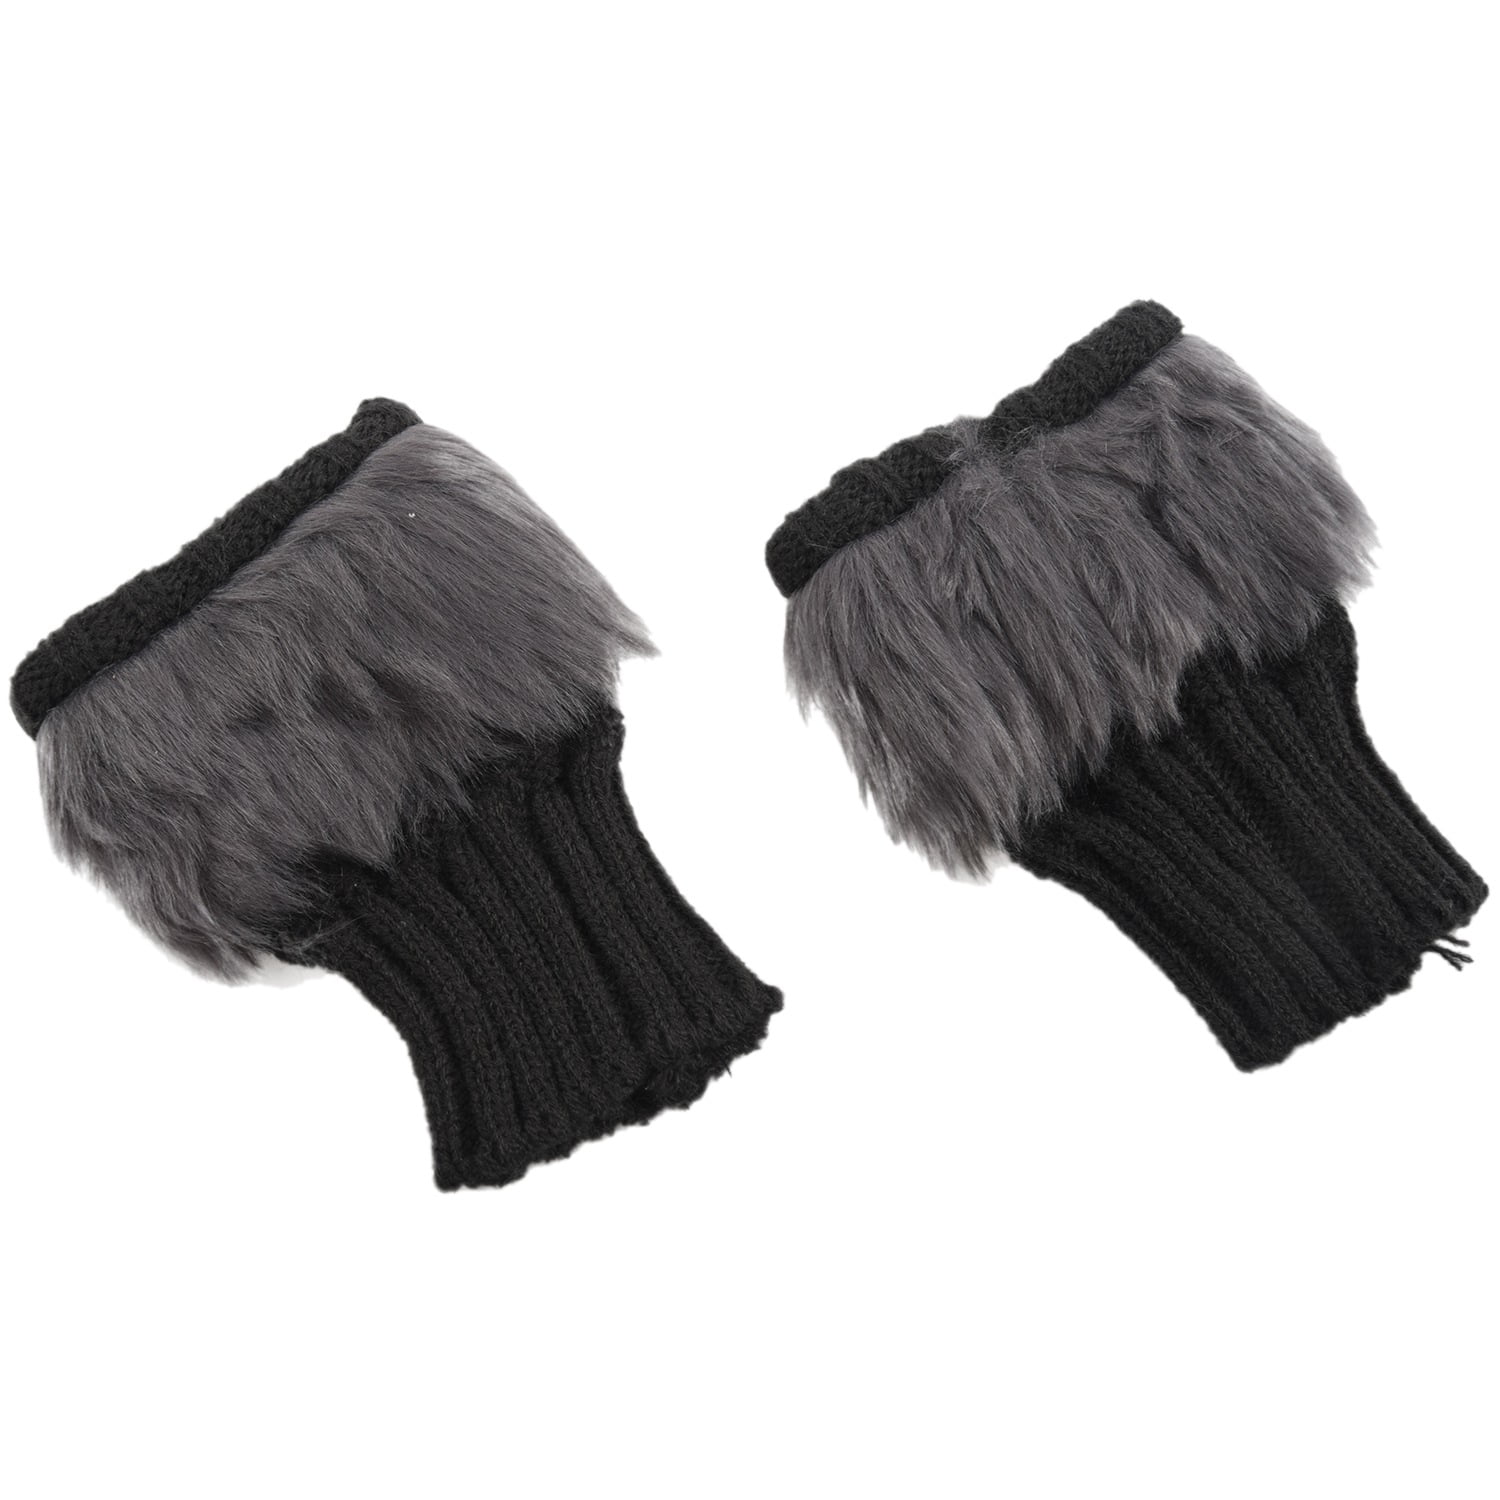 Lady Girl Shaggy Faux Fur Knit Fluffy Hands/LEG Warmers Ankle Boot Covers G S8K5 